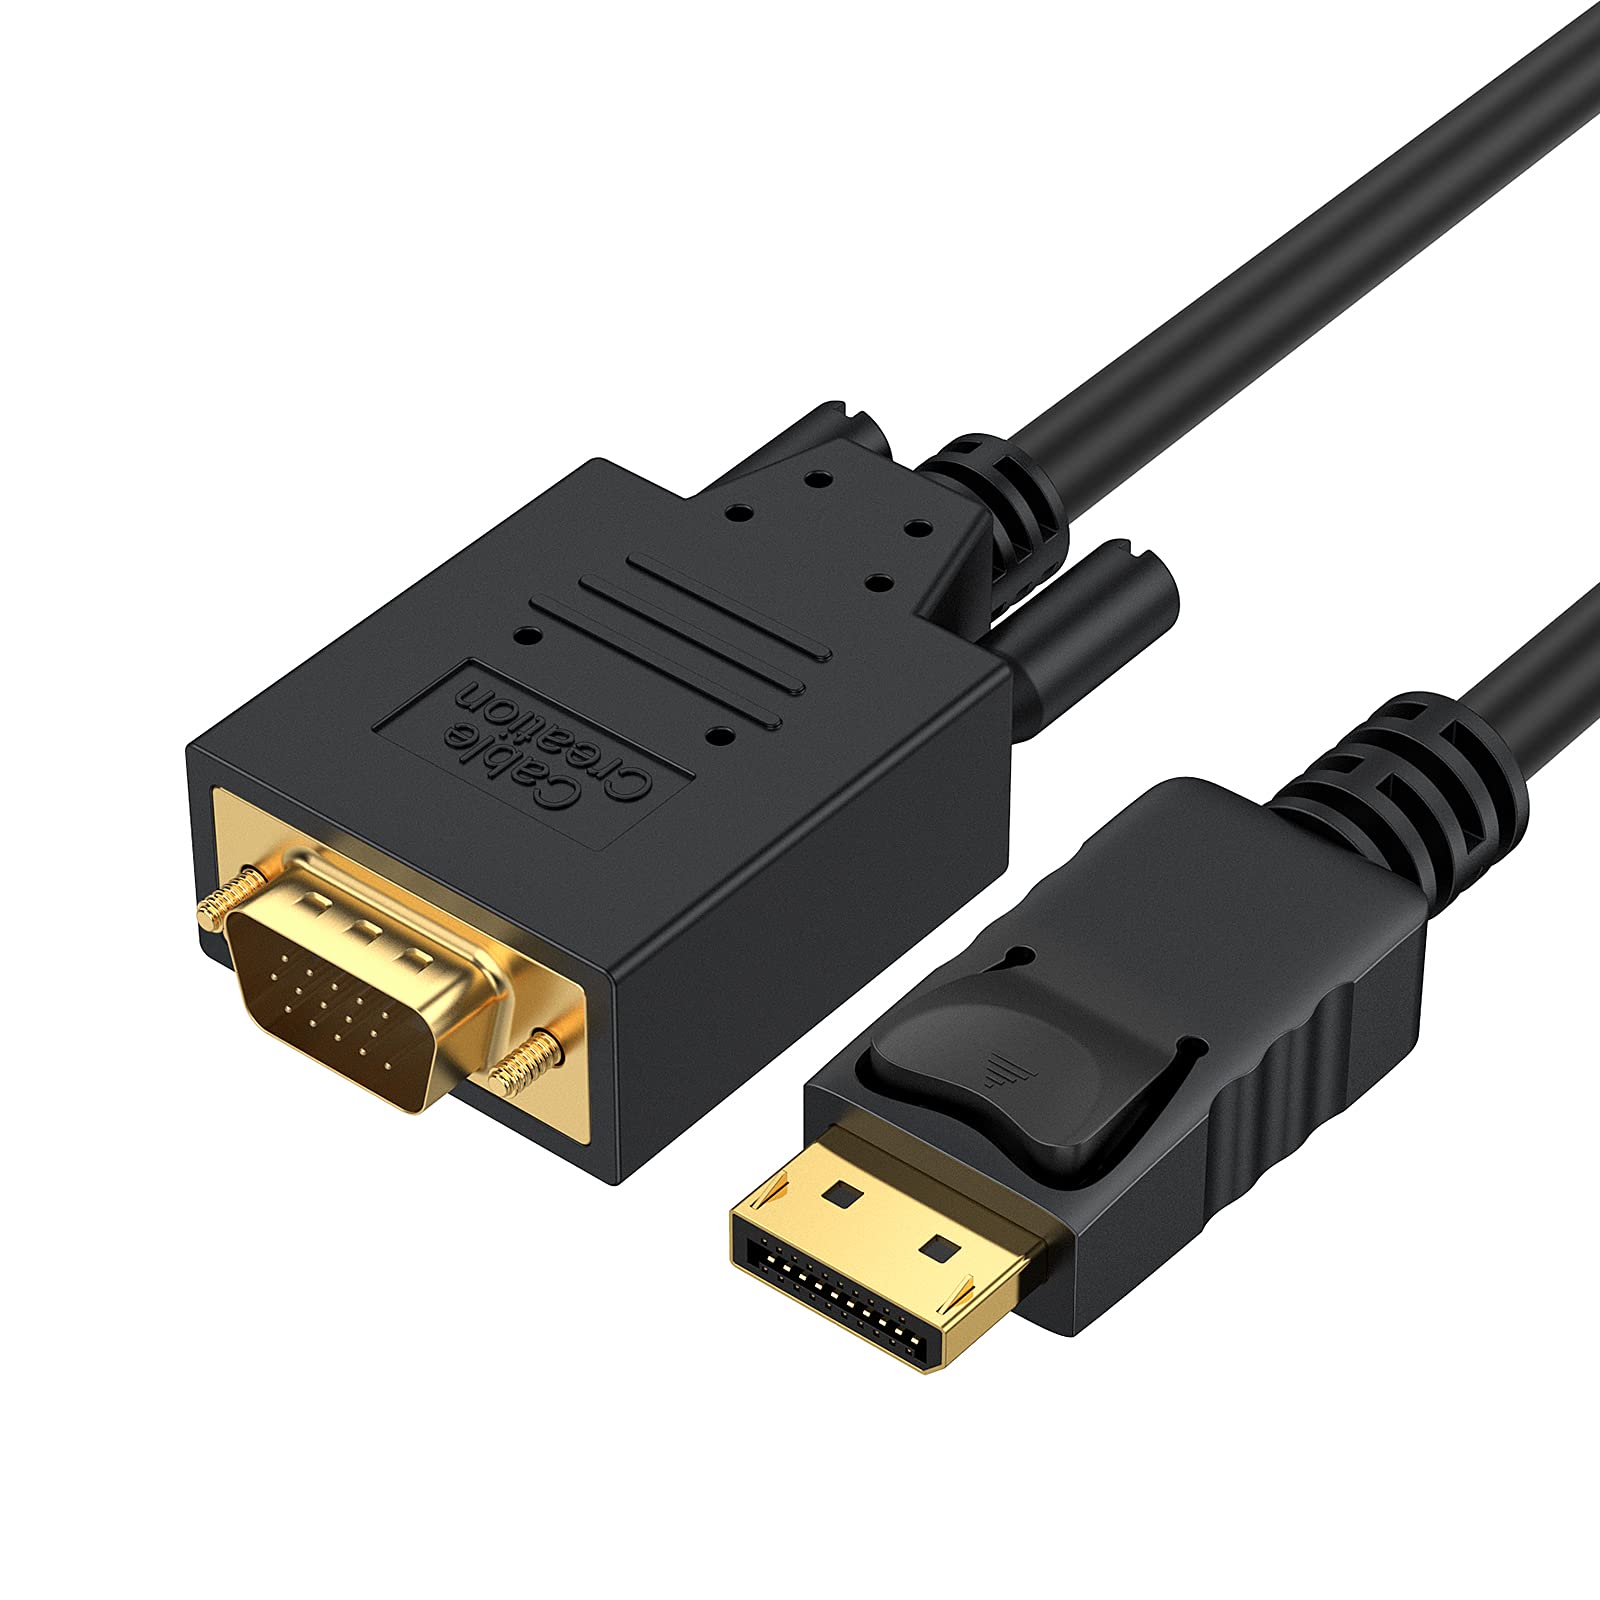 Book Cover CableCreation Displayport to VGA Cable 6FT, Displayport to VGA Adapter Gold Plated 1080P@60Hz, Standard DP Male to VGA Male Cable, Compatible with Laptop, PC, TV, Projector, Black 6FT-1PACK ABS